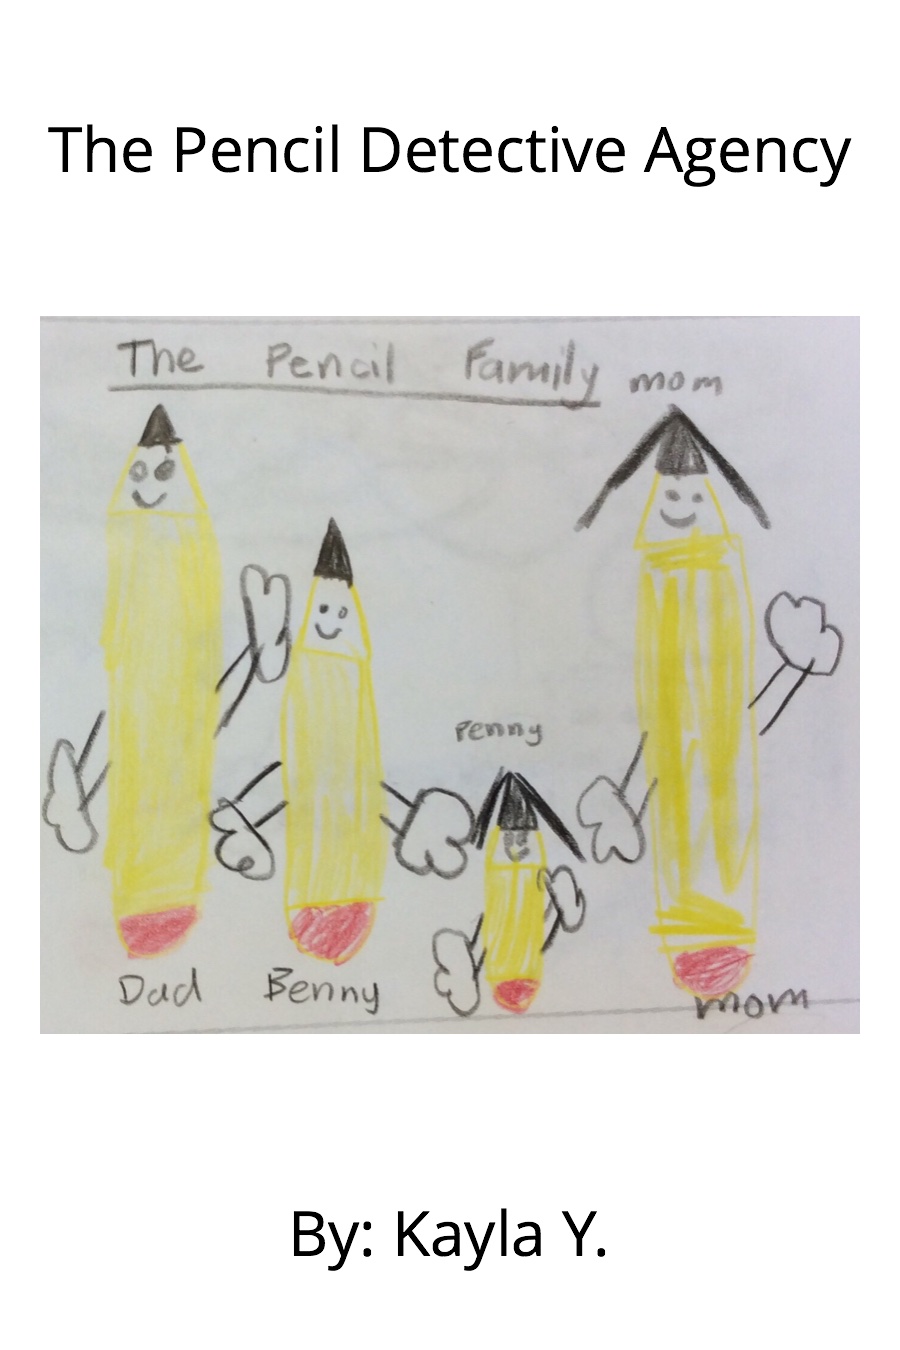 The Pencil Detective Agency by Kayla Y